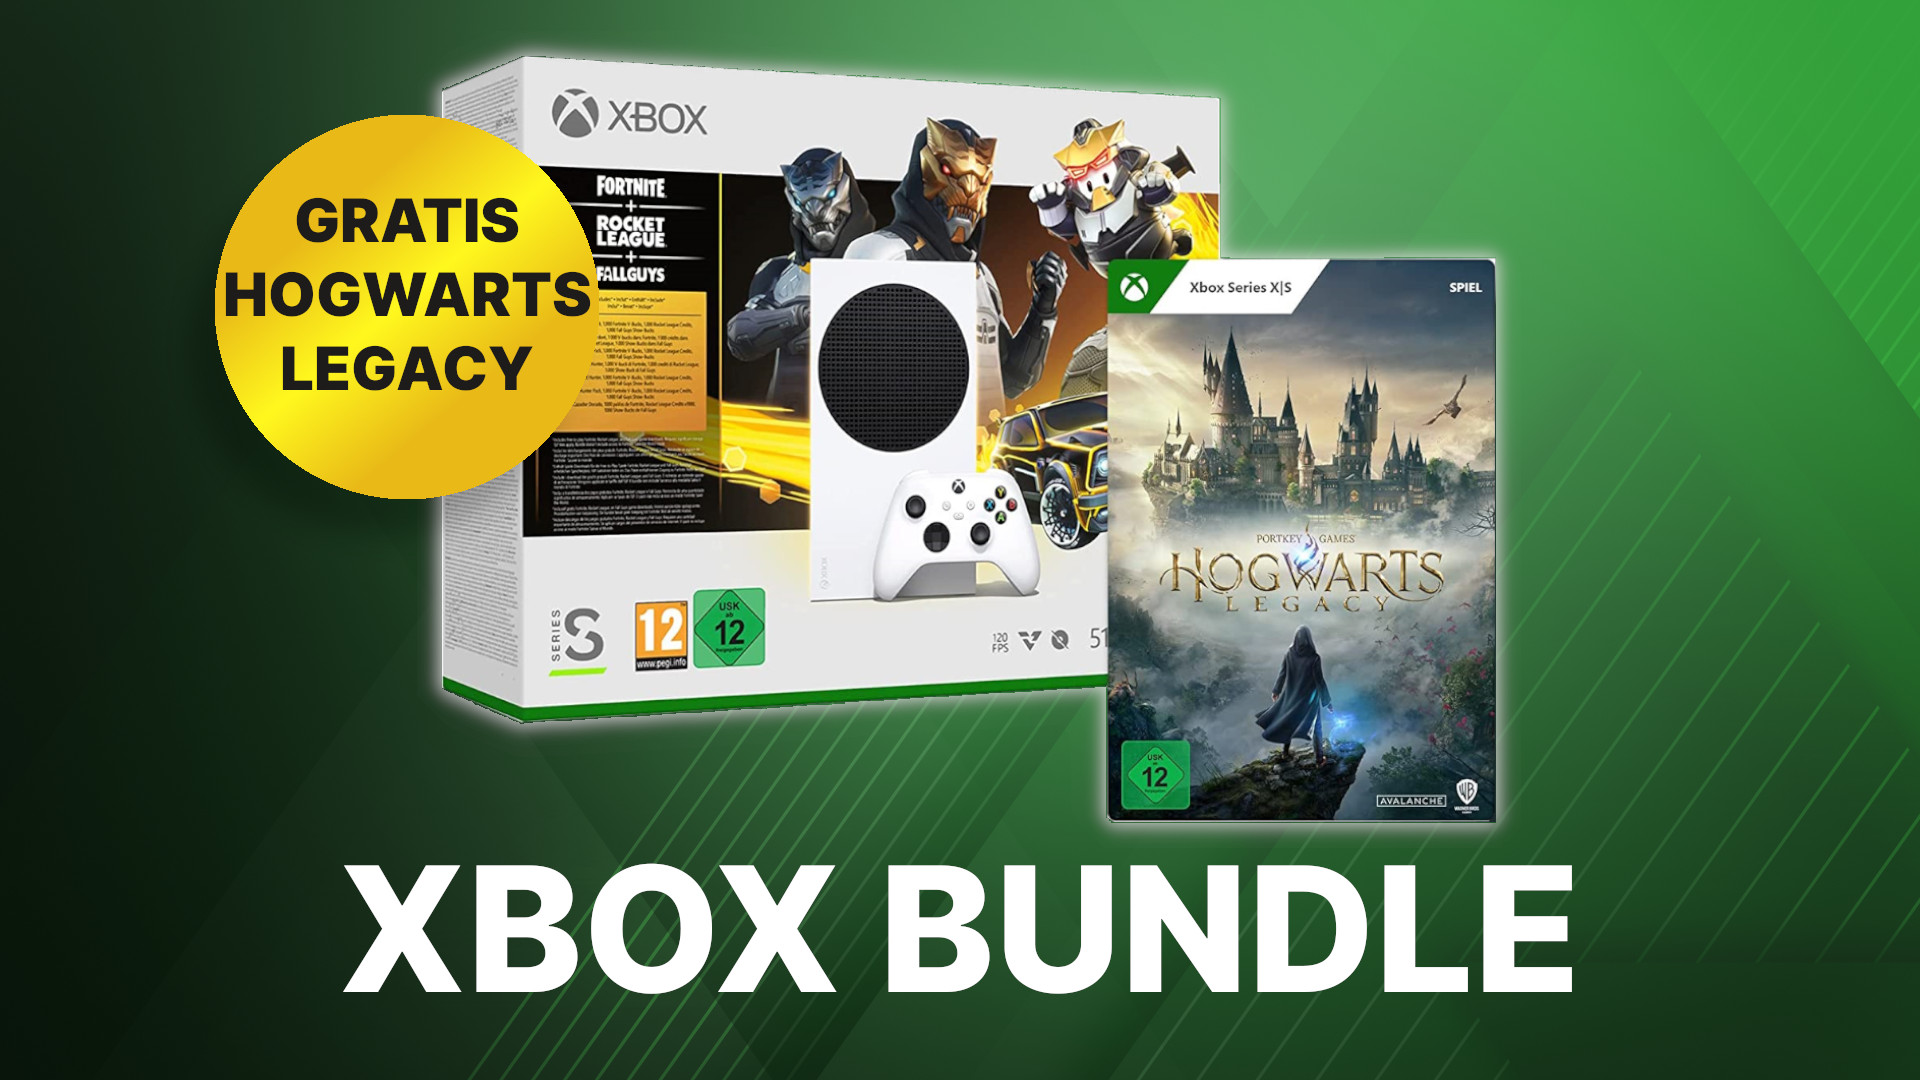 Hogwarts Legacy for free: Get the Xbox Bundle now on sale at Amazon